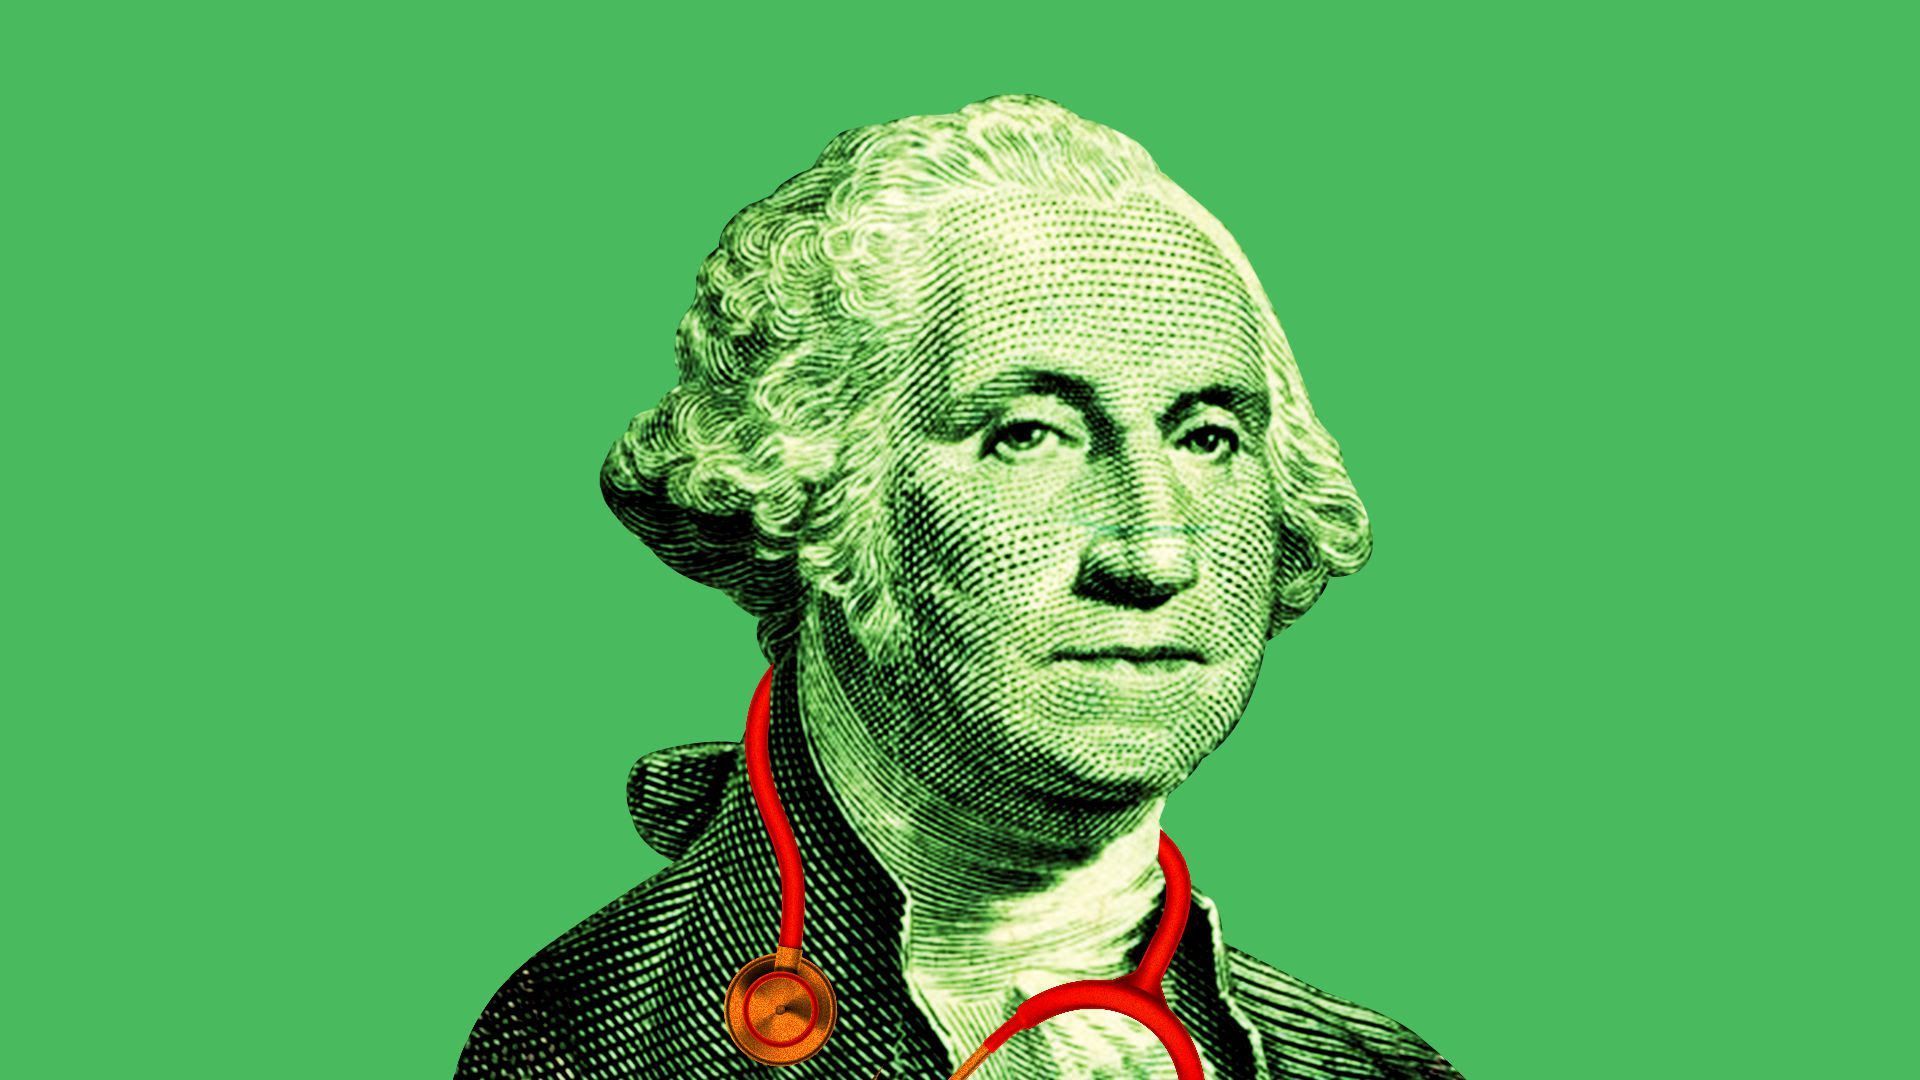 Dollar bill version of George Washington with a stethoscope around his neck.